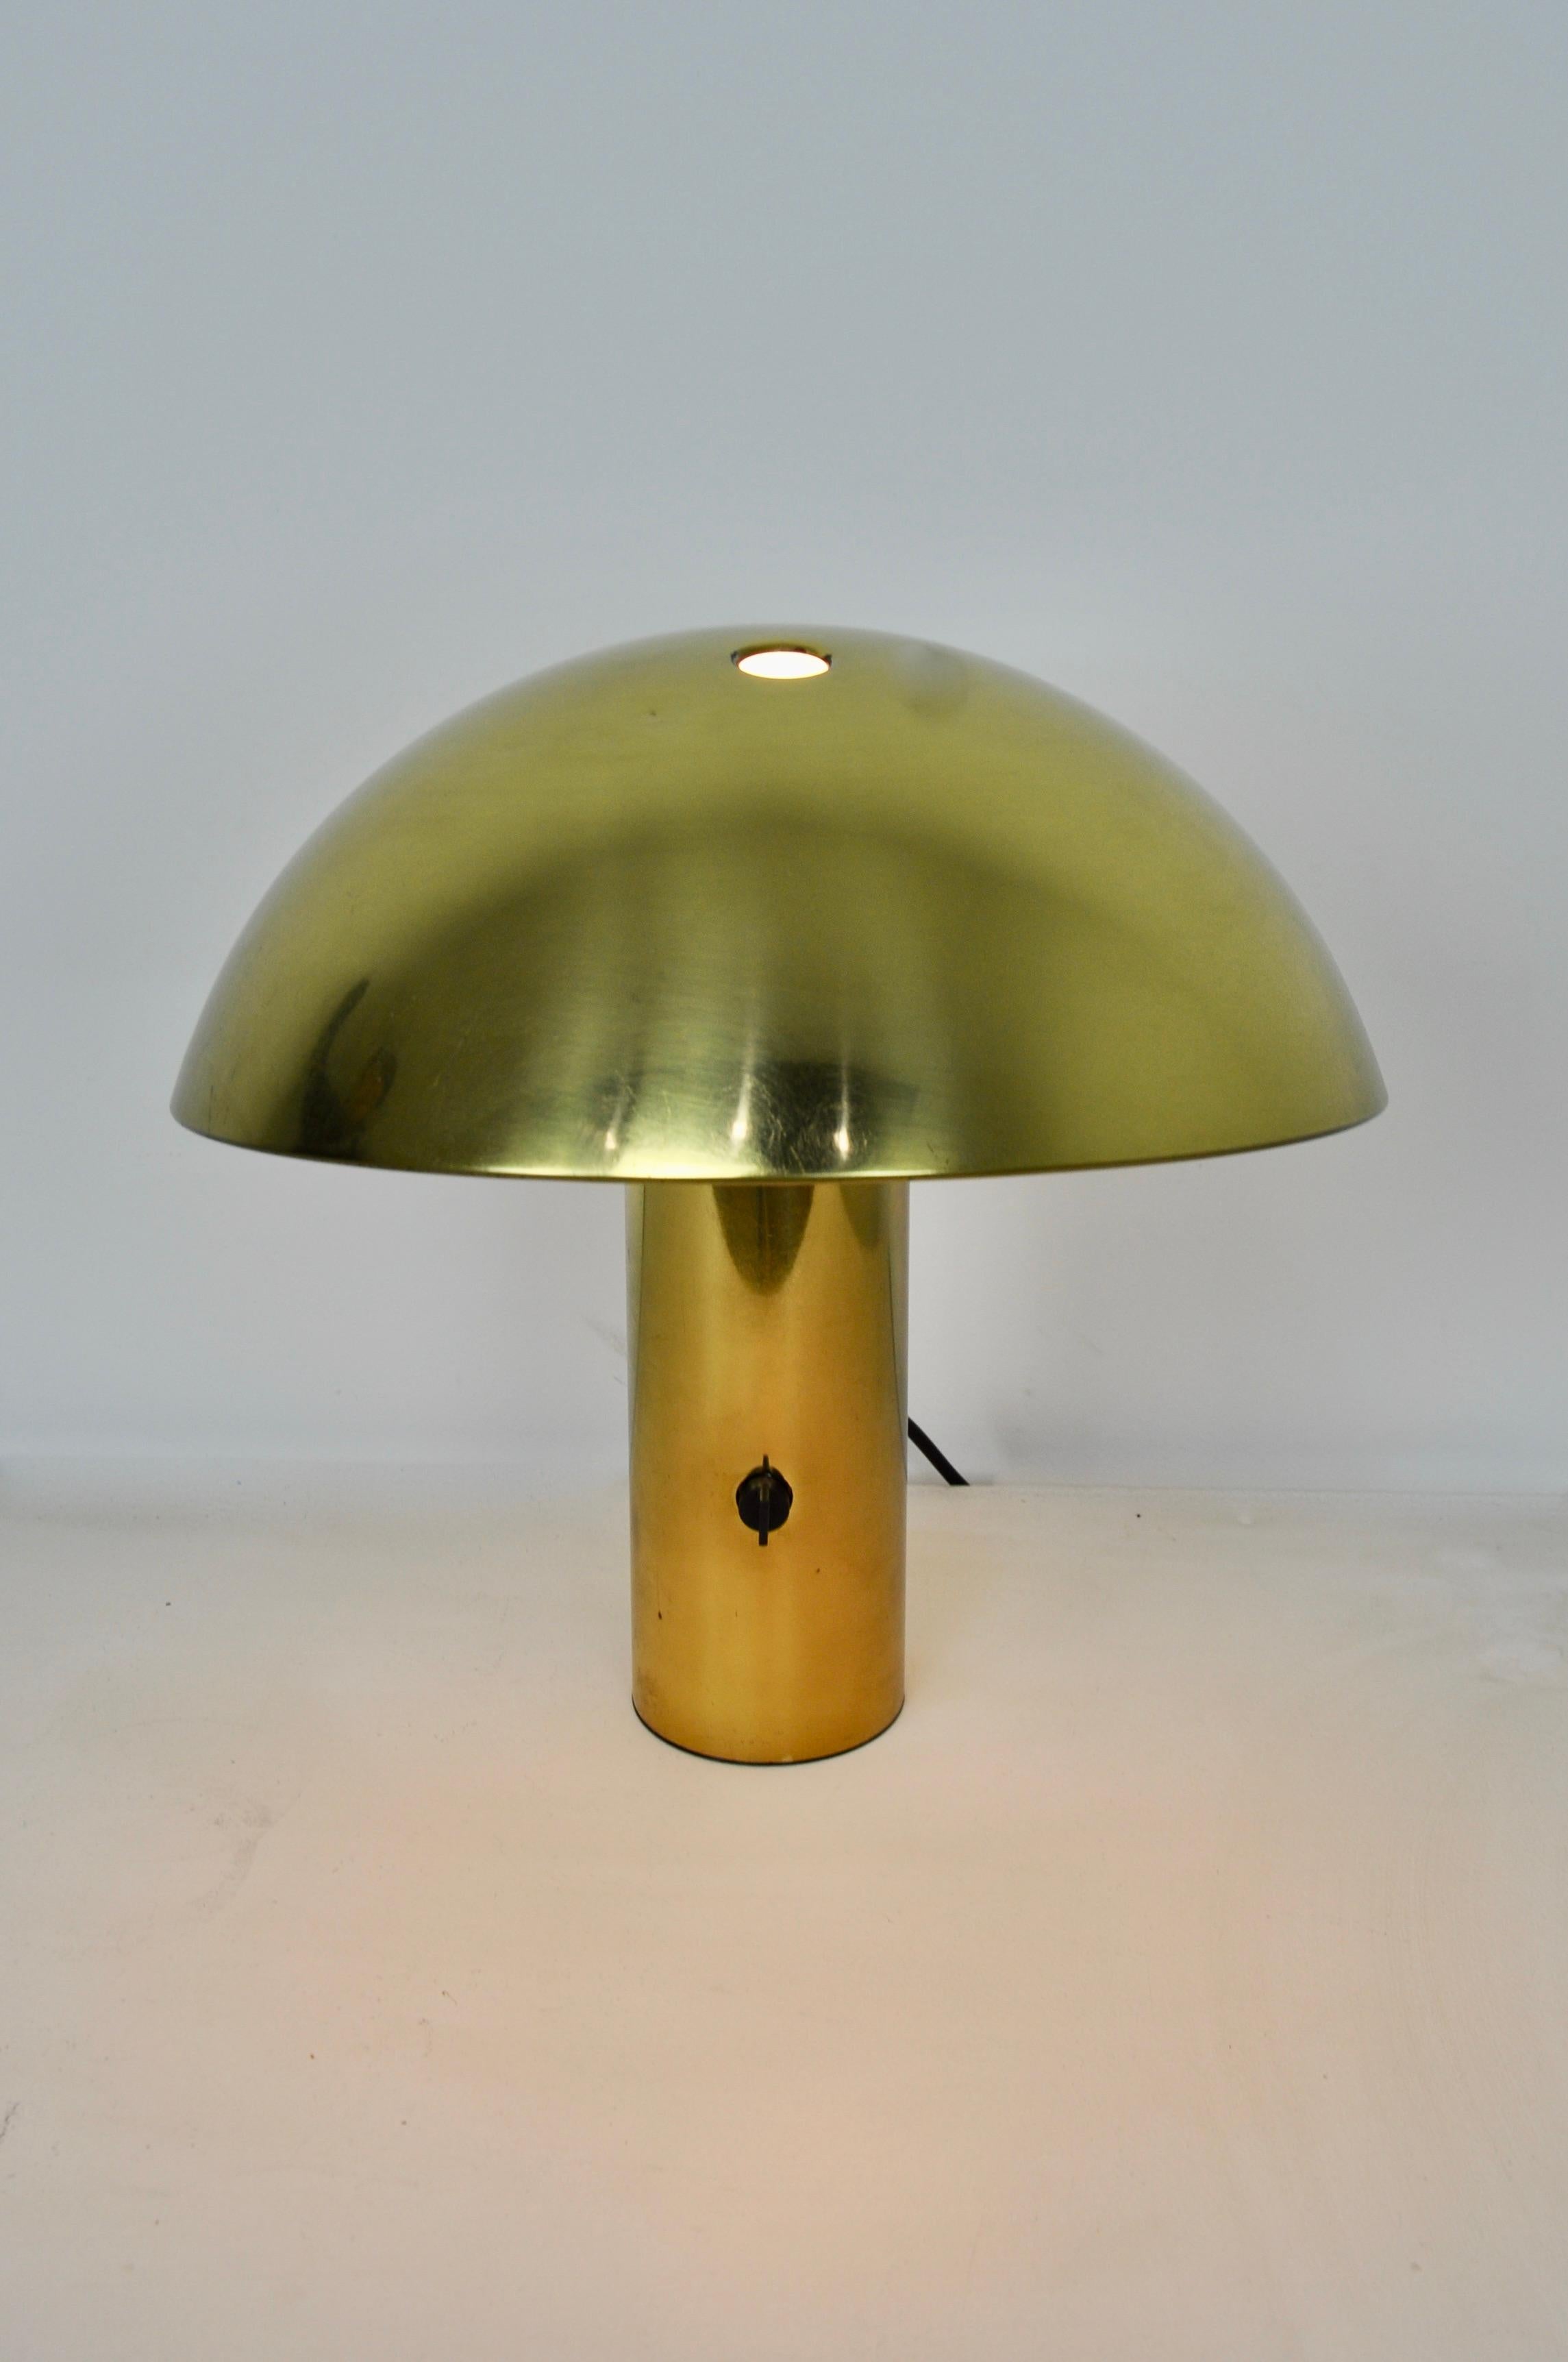 Gold color lamp. Wear due to time and age of the lamp.
 